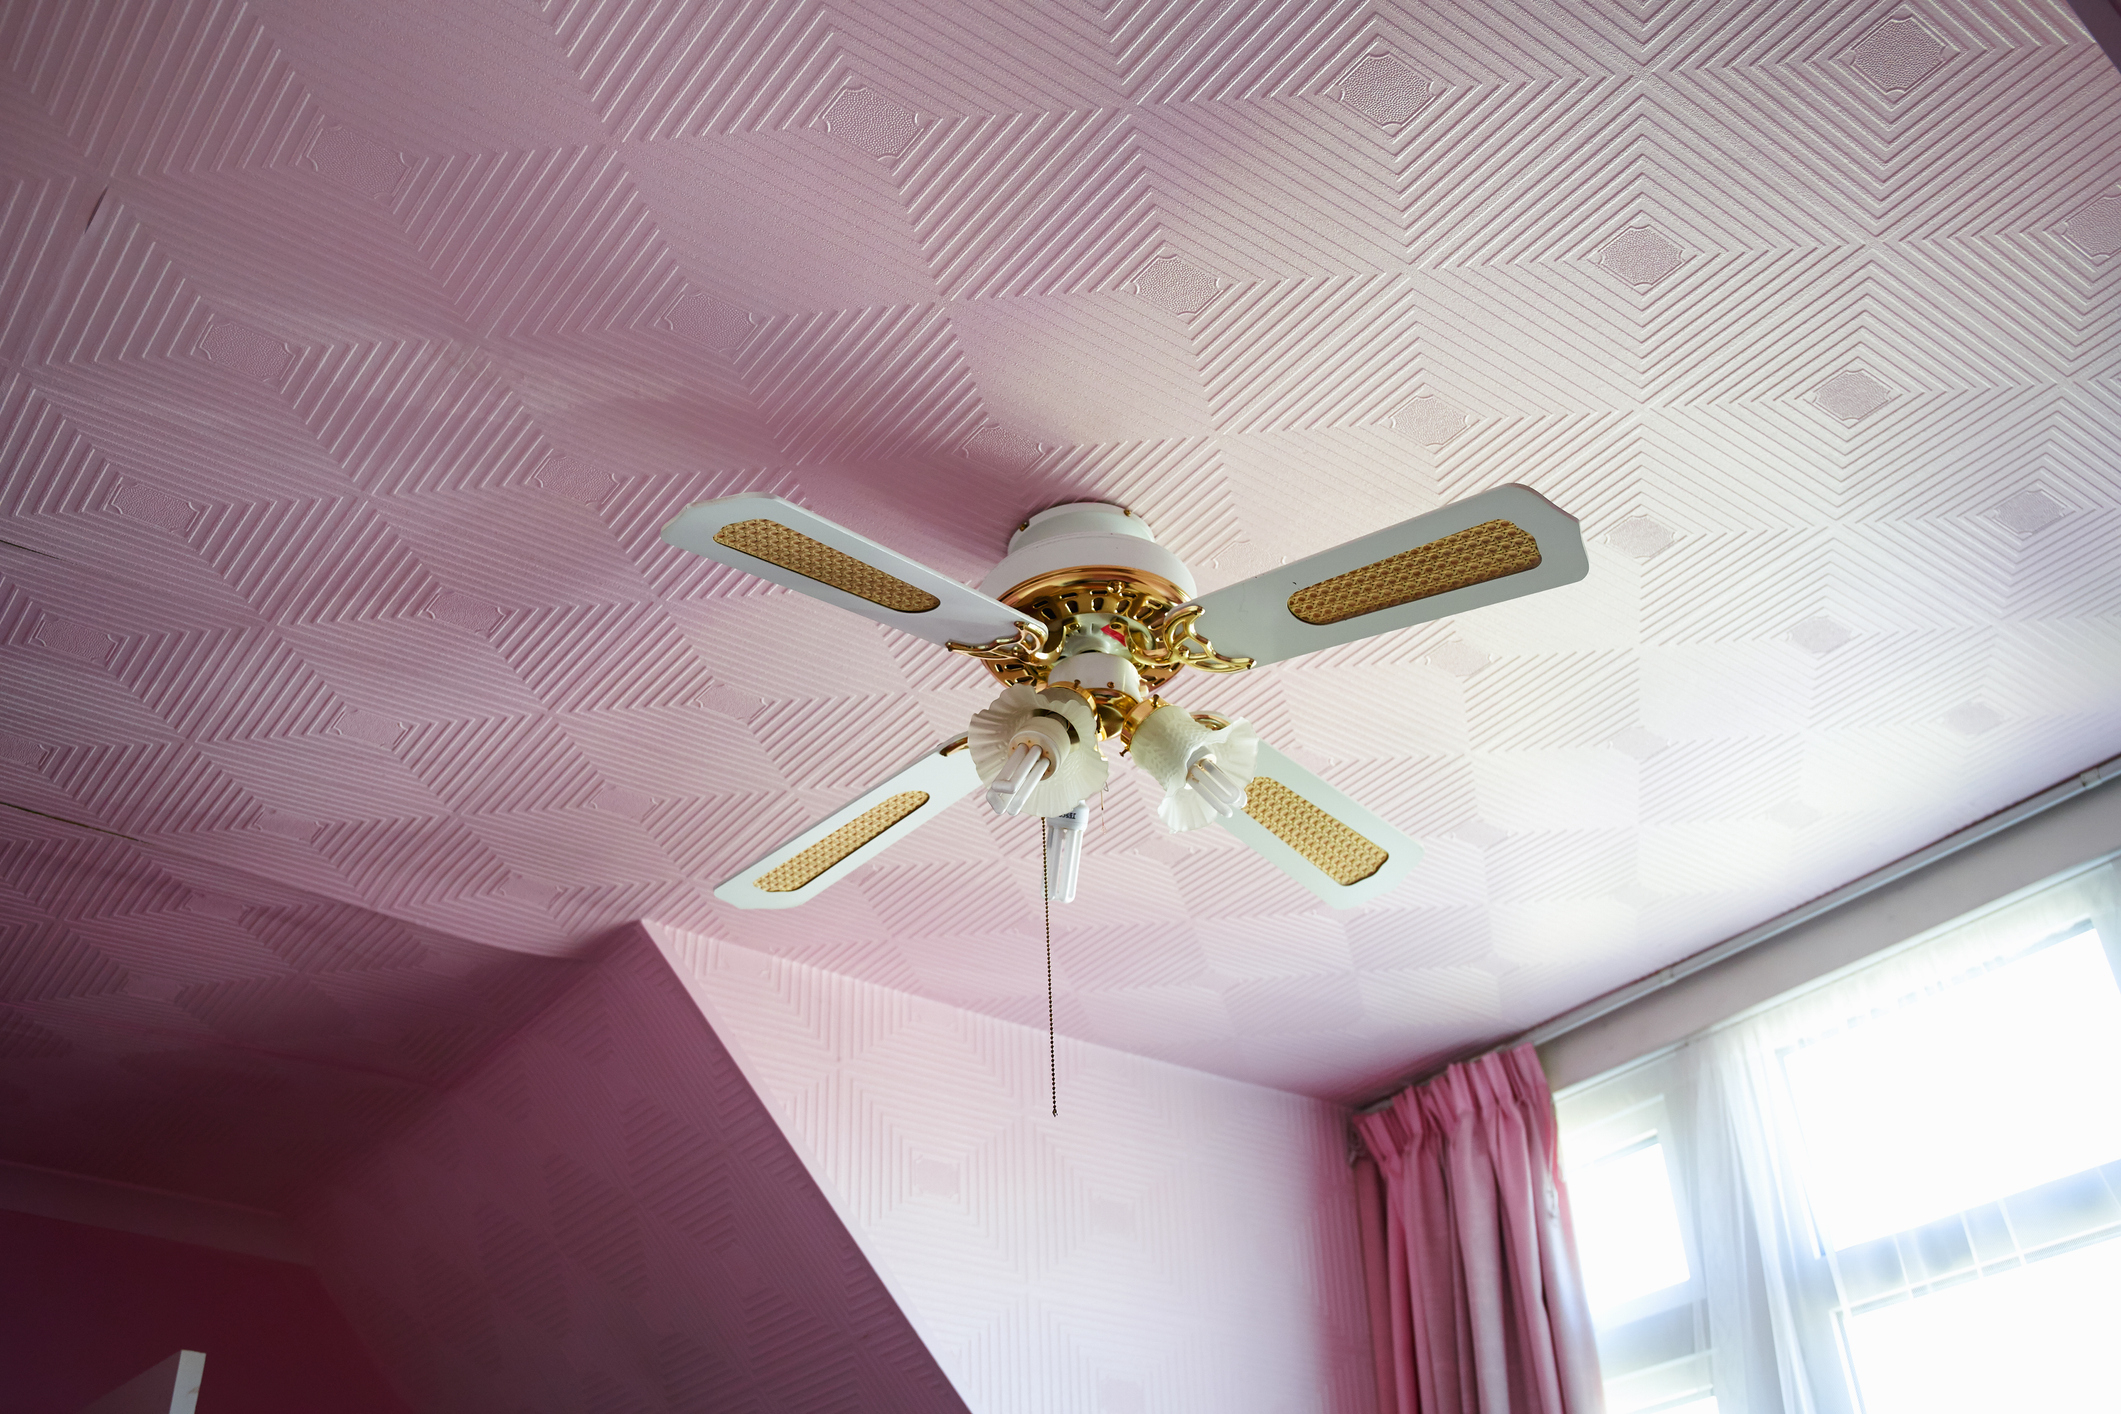 Ceiling fan with light fixture attached, mounted on a textured ceiling, near a window with pink curtains